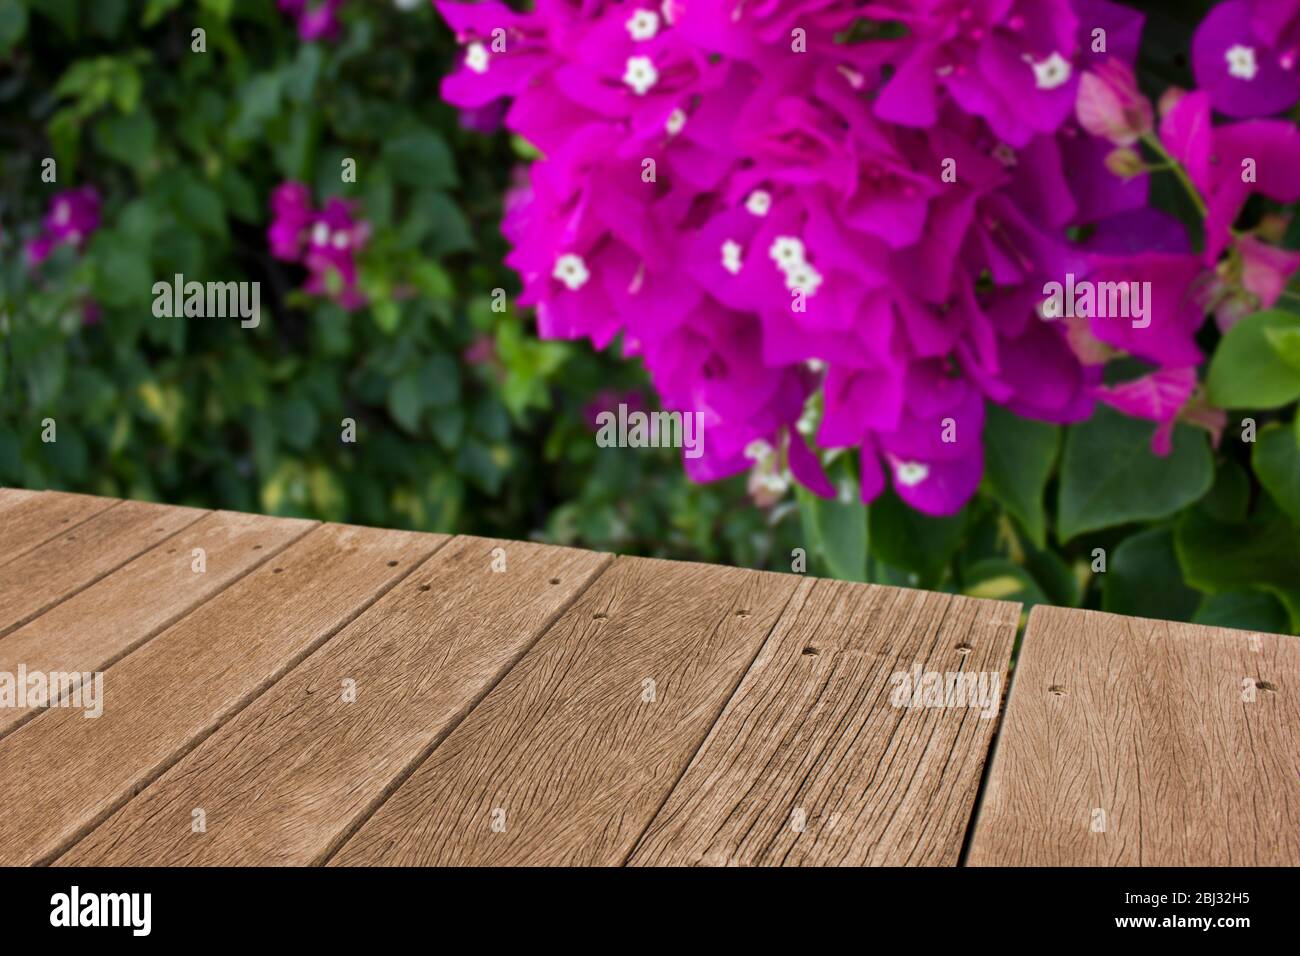 Wooden board empty table in front of blurred background Mock up for display of product Stock Photo